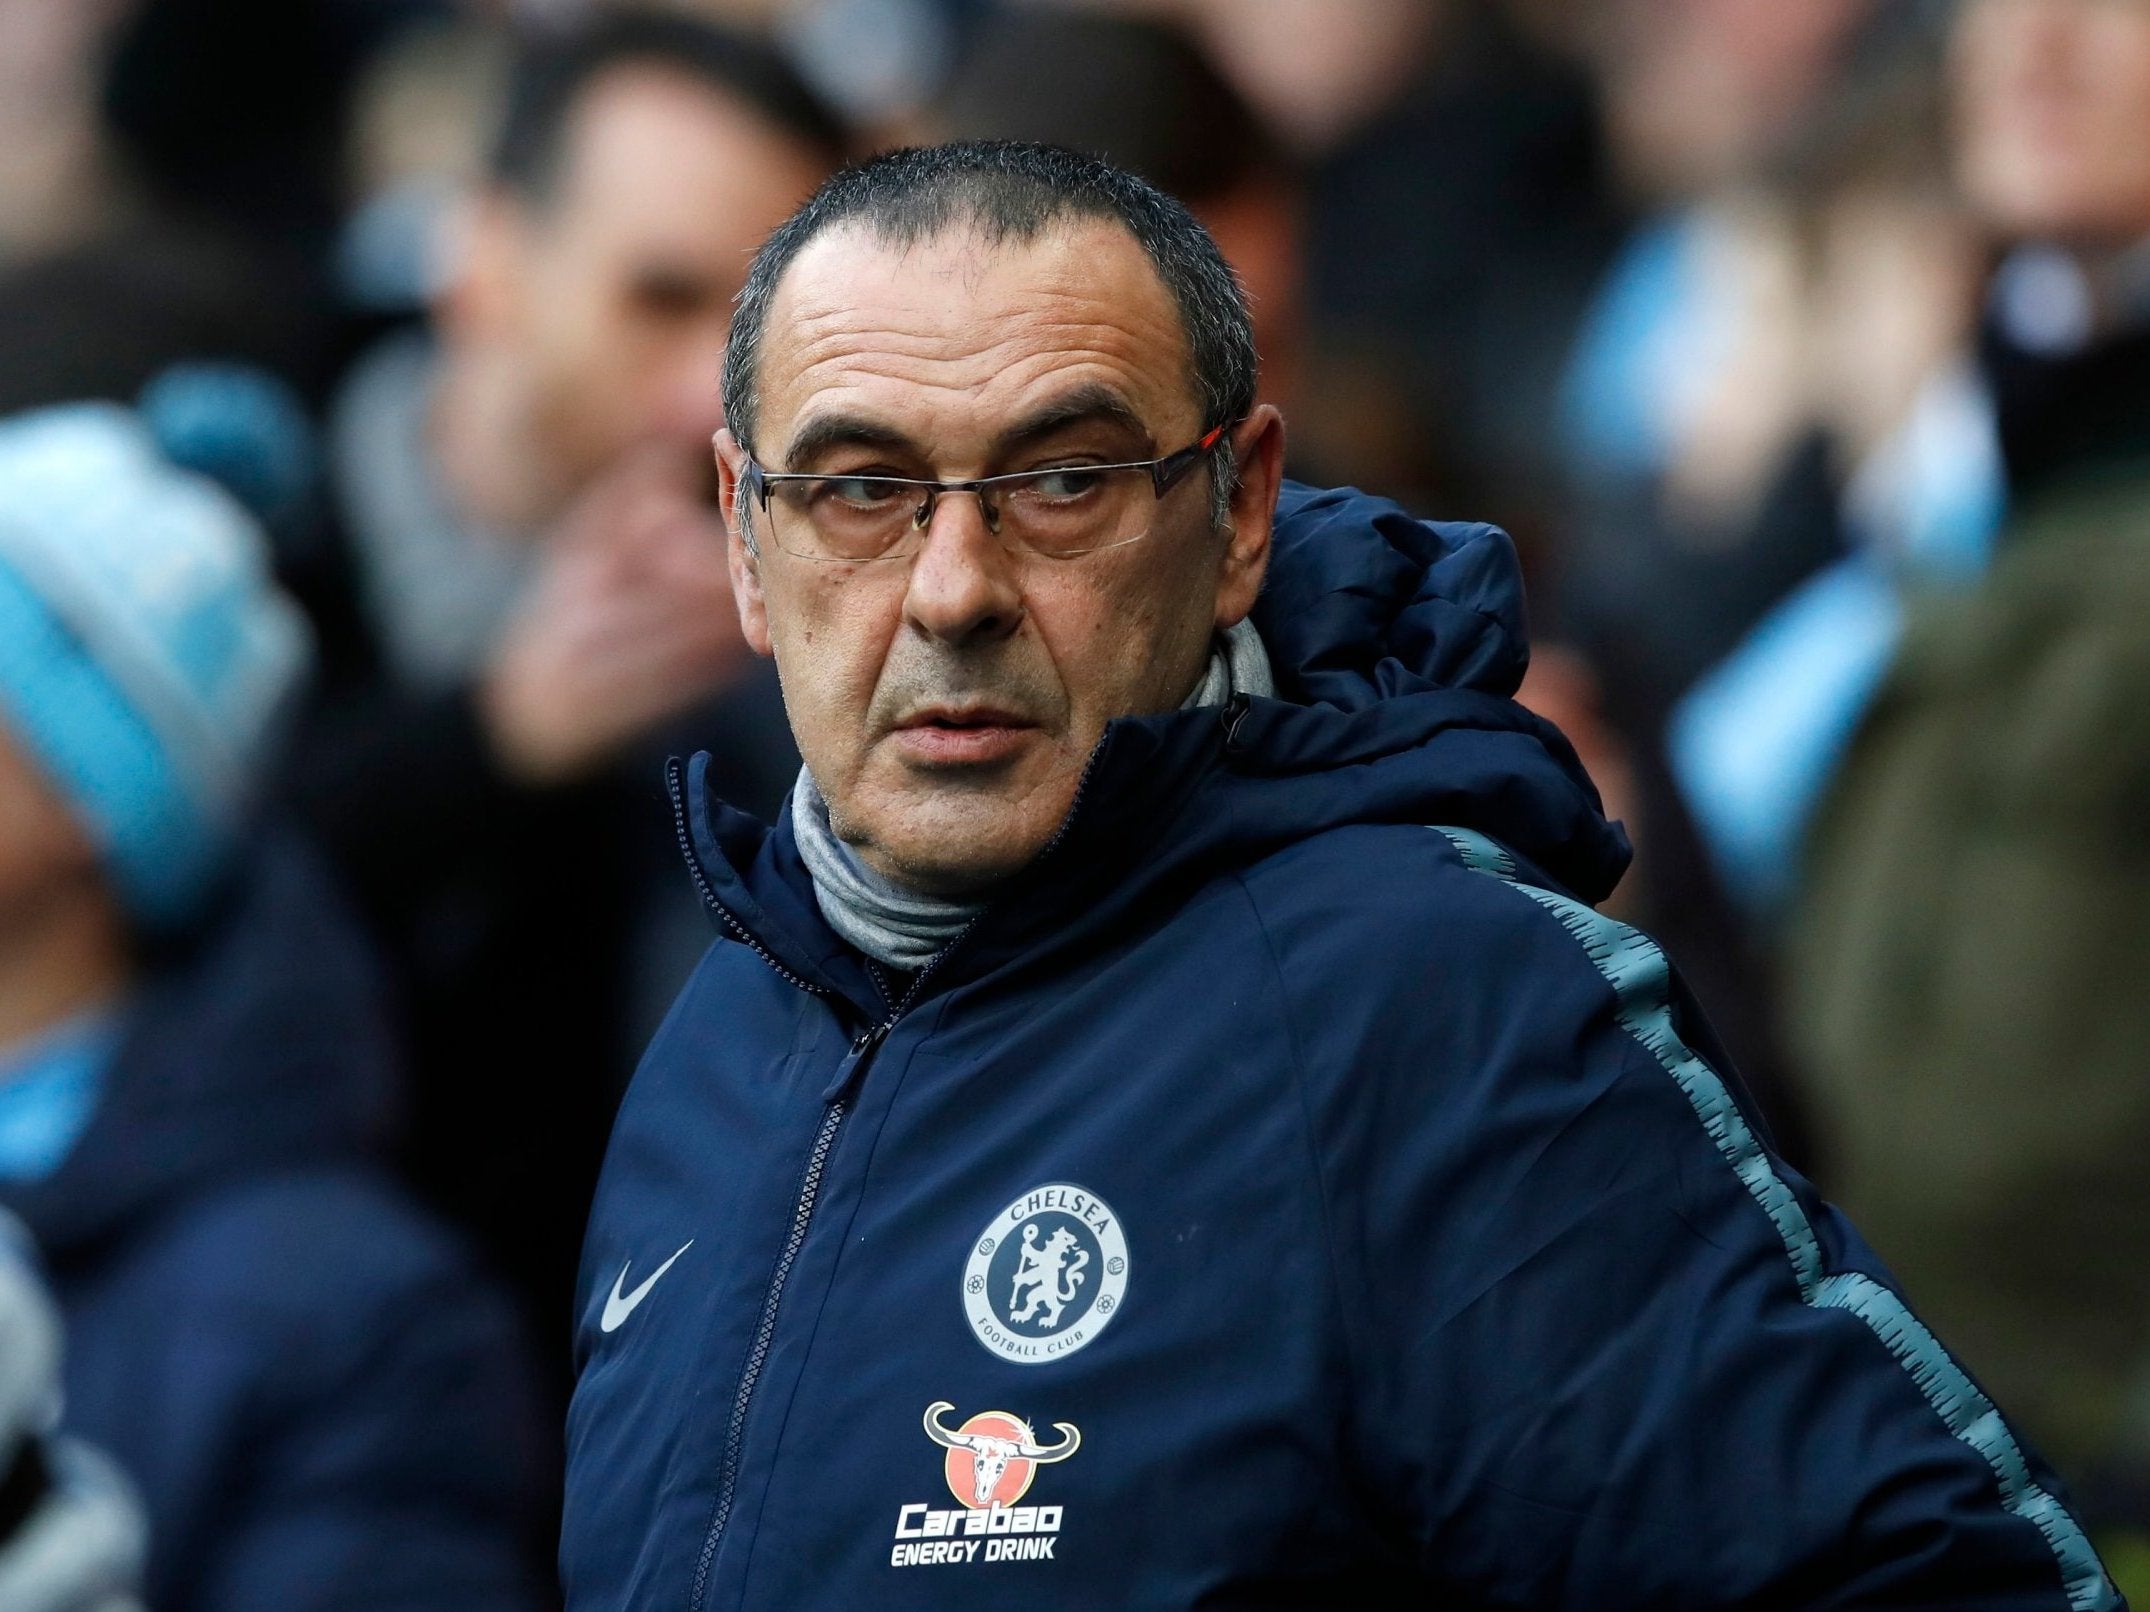 Maurizio Sarri has been linked with a move back to Italy